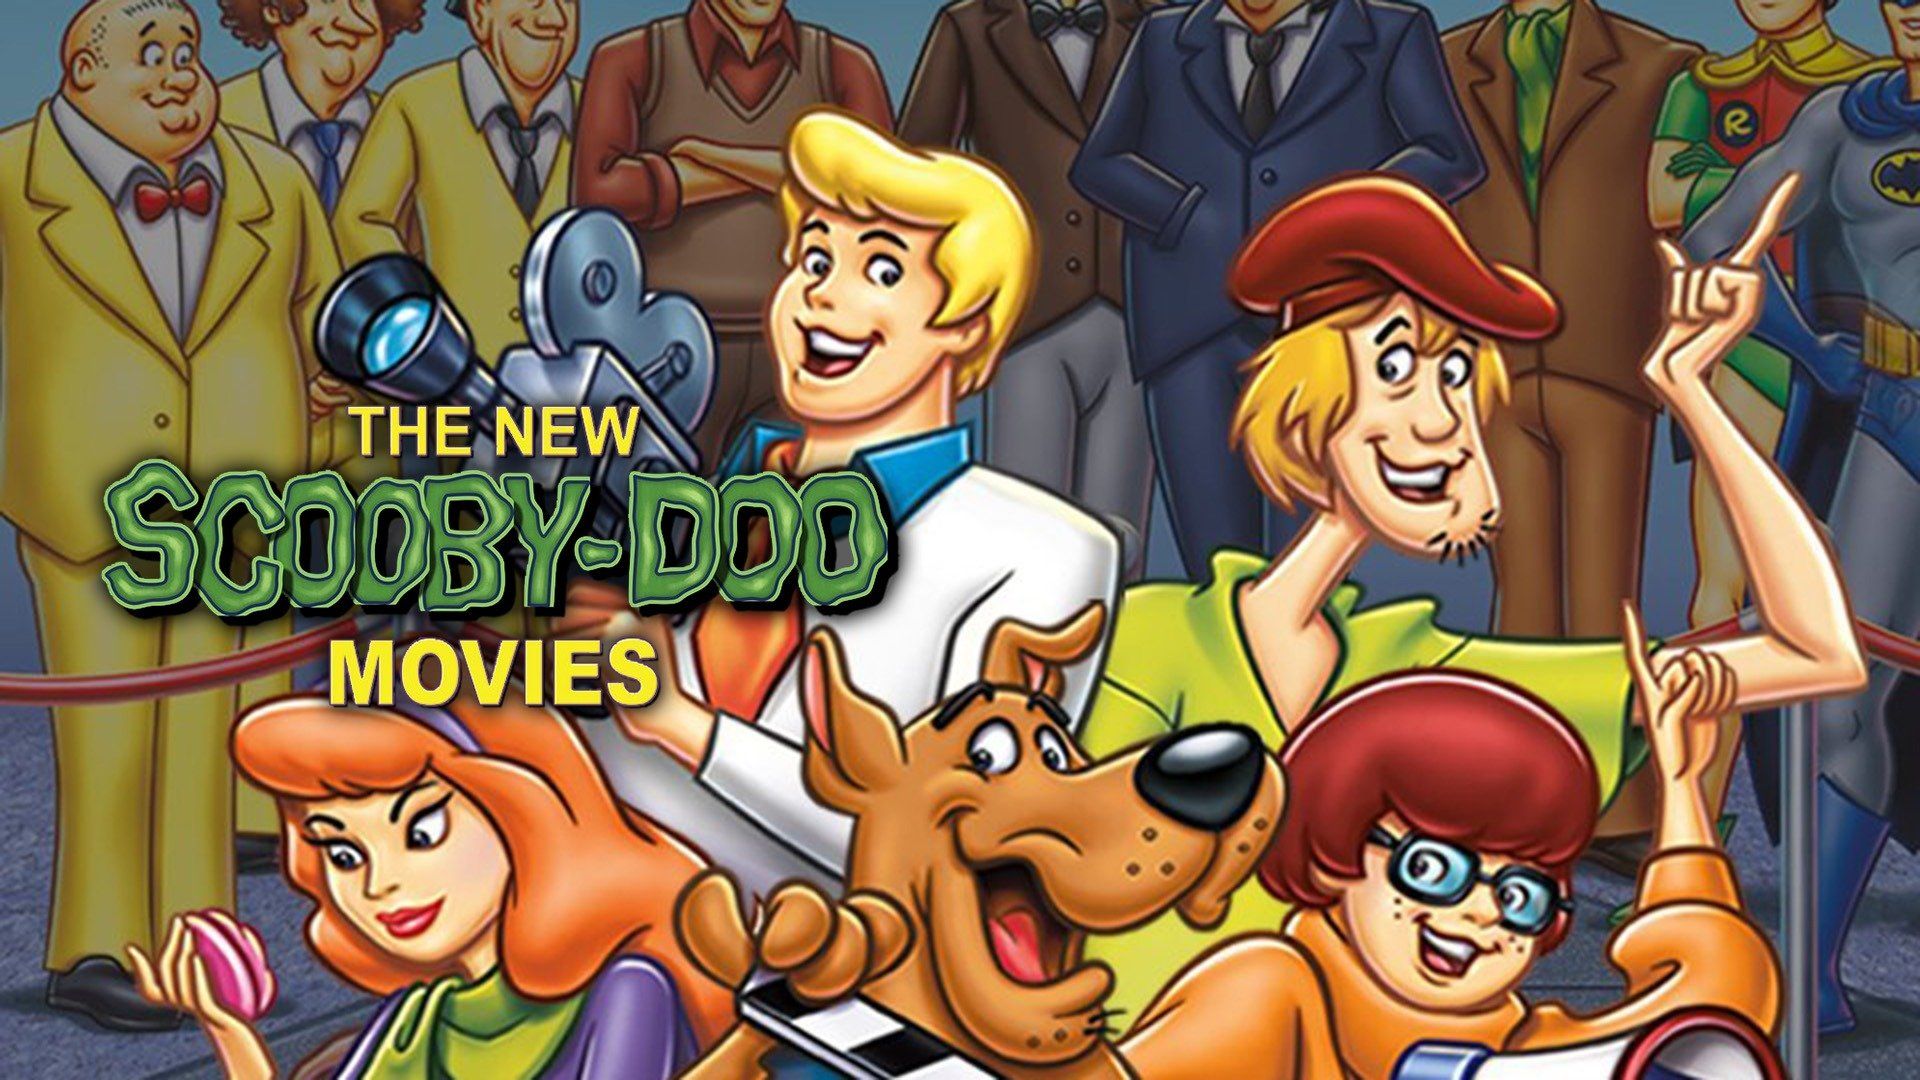 Watch The New Scooby-Doo Movies · Season 1 Full Episodes Free Online - Plex